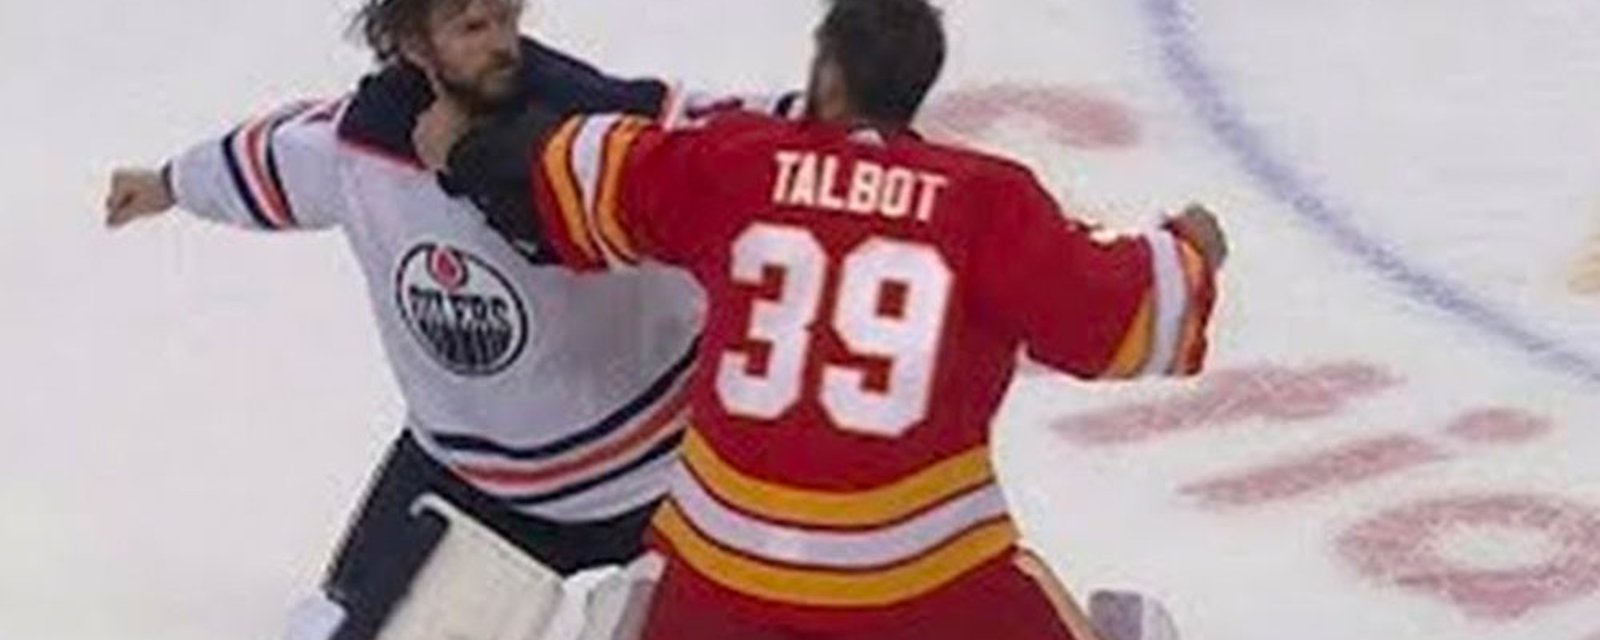 Upset, Talbot’s wife got drunk because of the goalie fight on Saturday! 